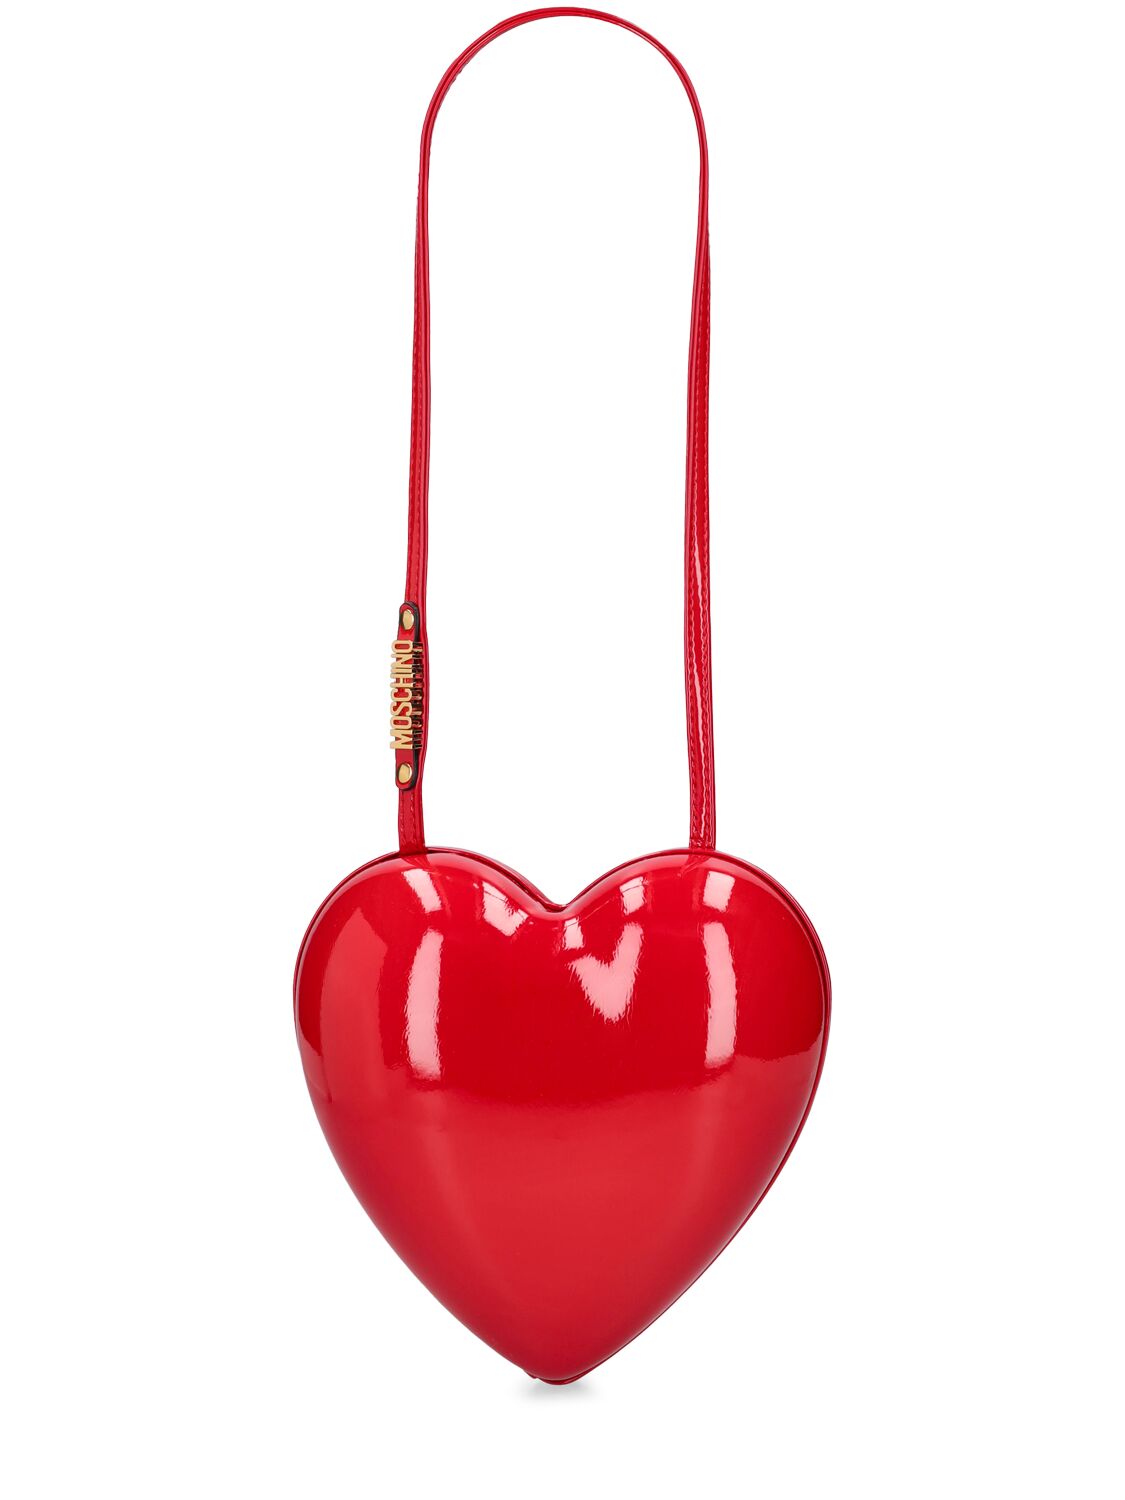 Moschino Heartbeat Patent Shoulder Bag In Red